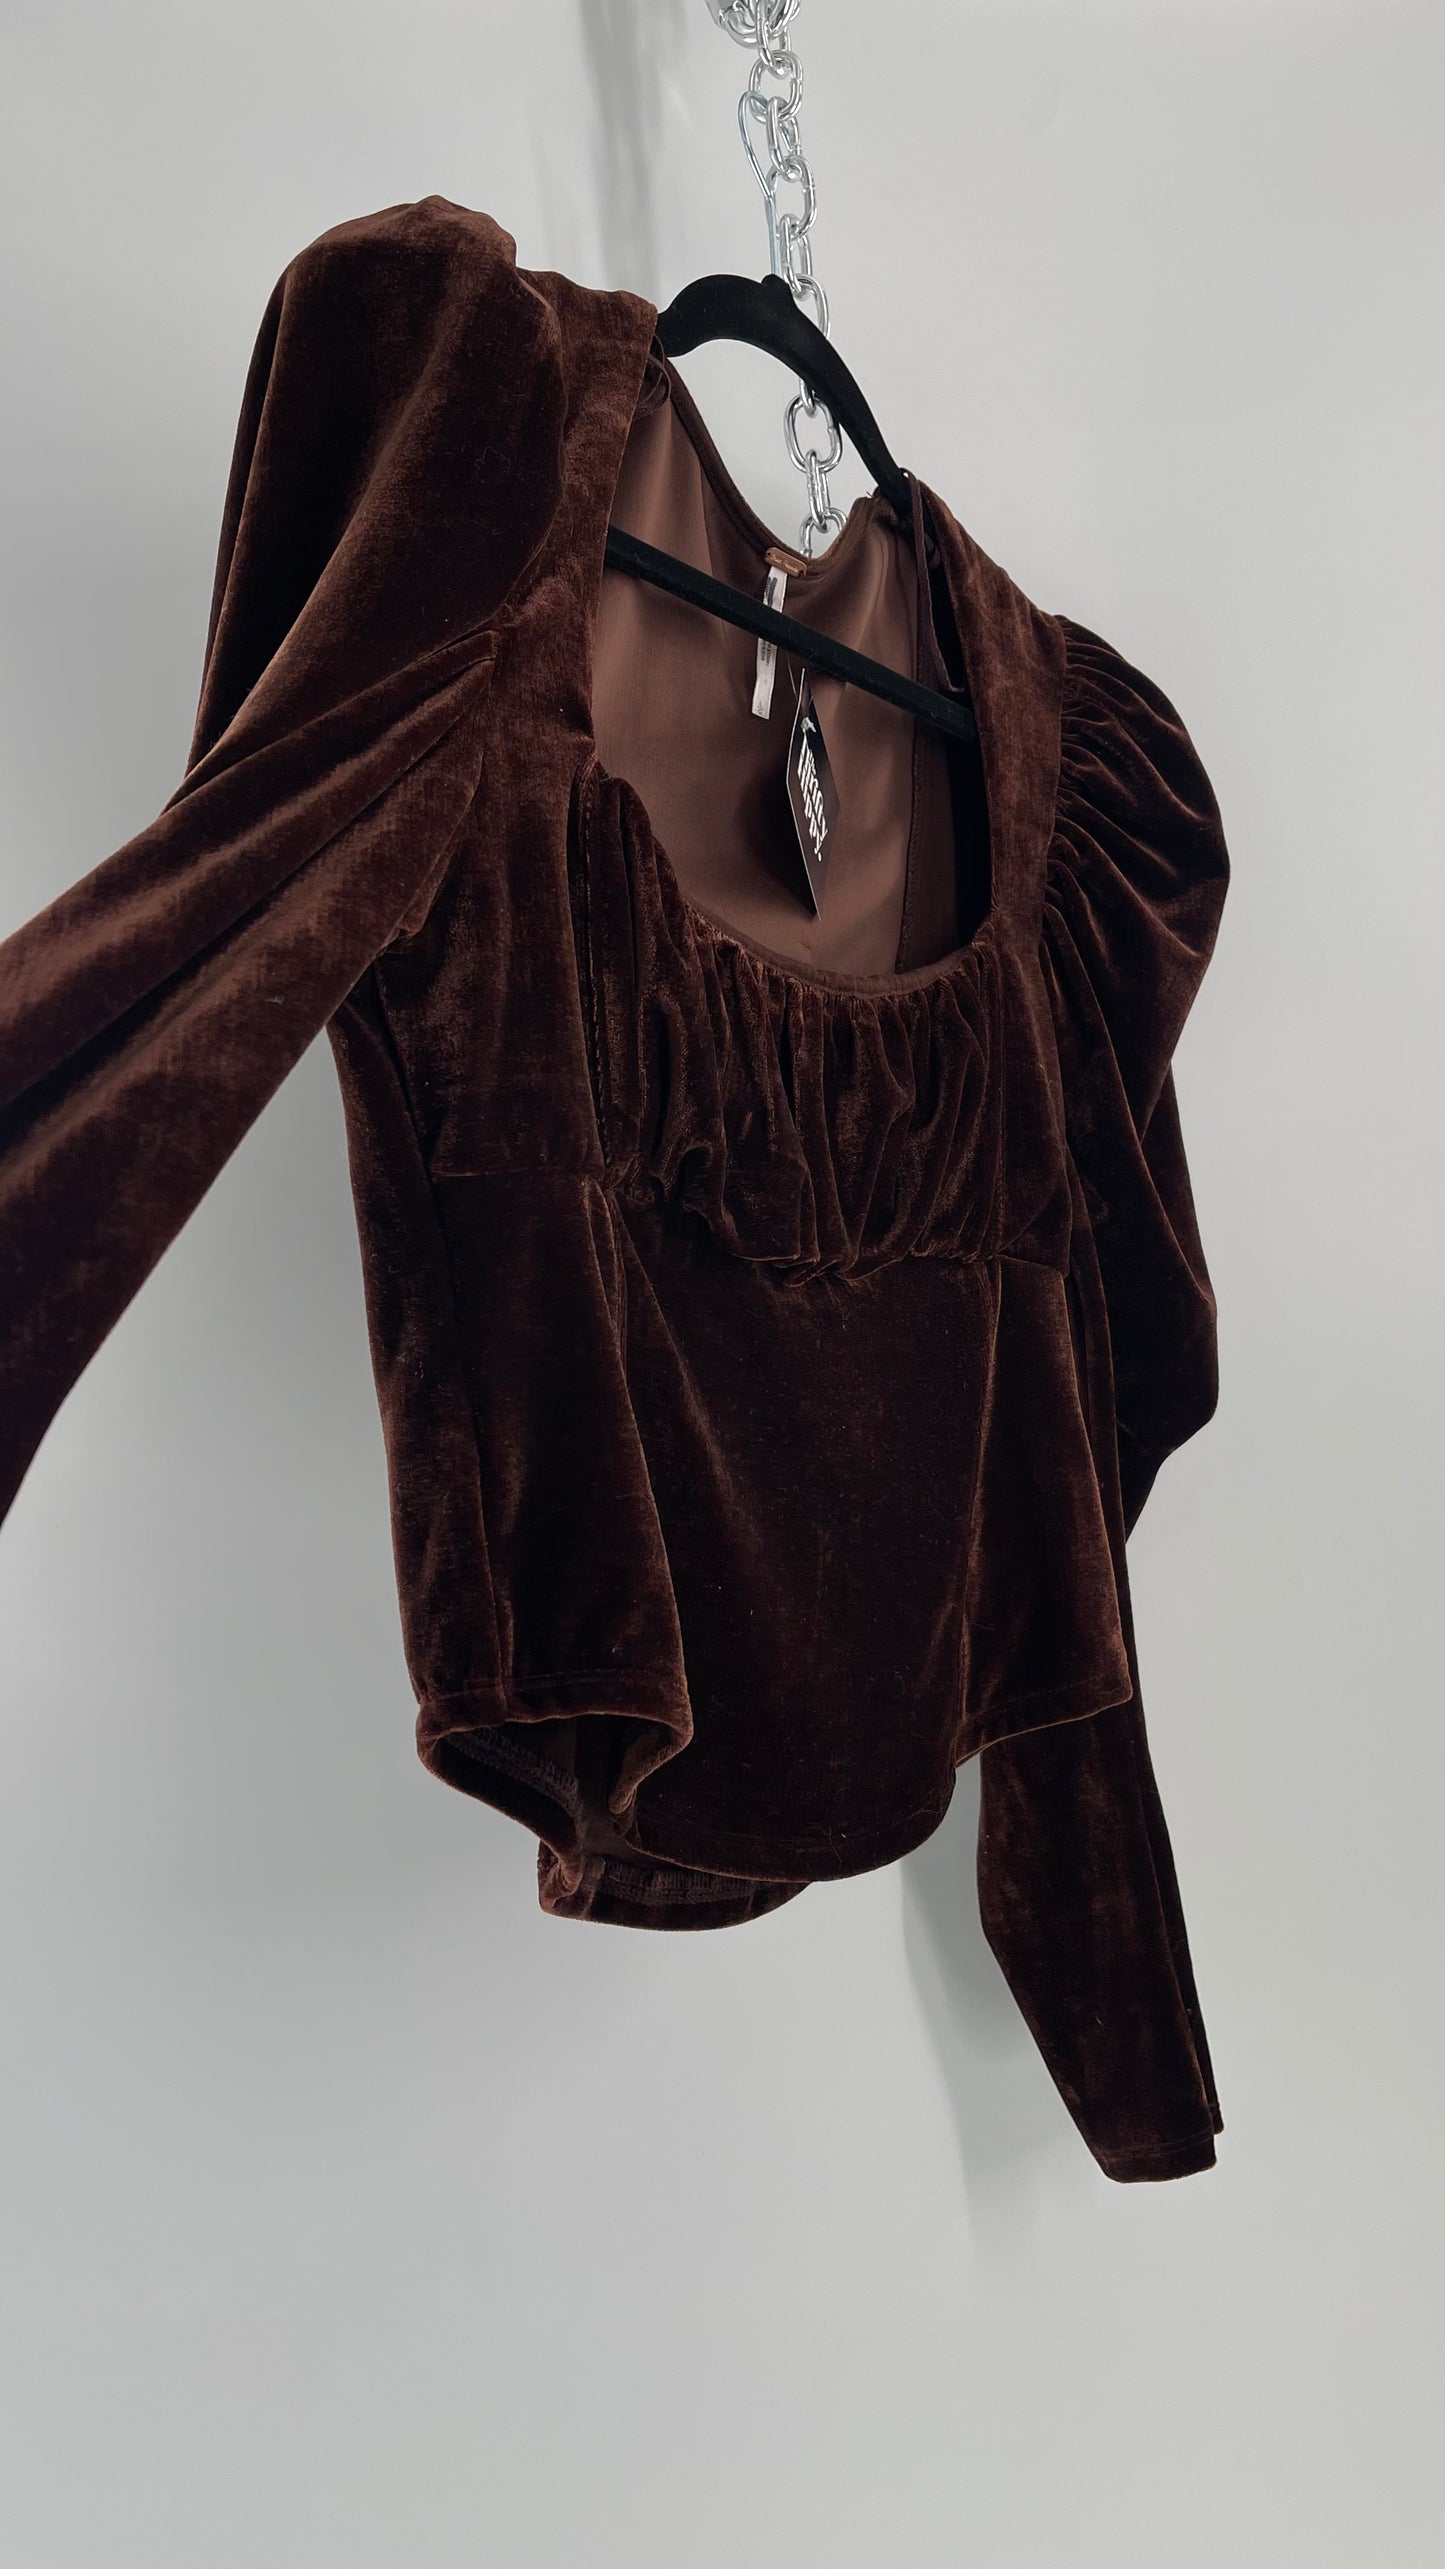 Free People Dark Brown Velvet Long Sleeve Cropped Blouse with Milkmaid Neckline and Renaissance Puff Shoulder (Large)